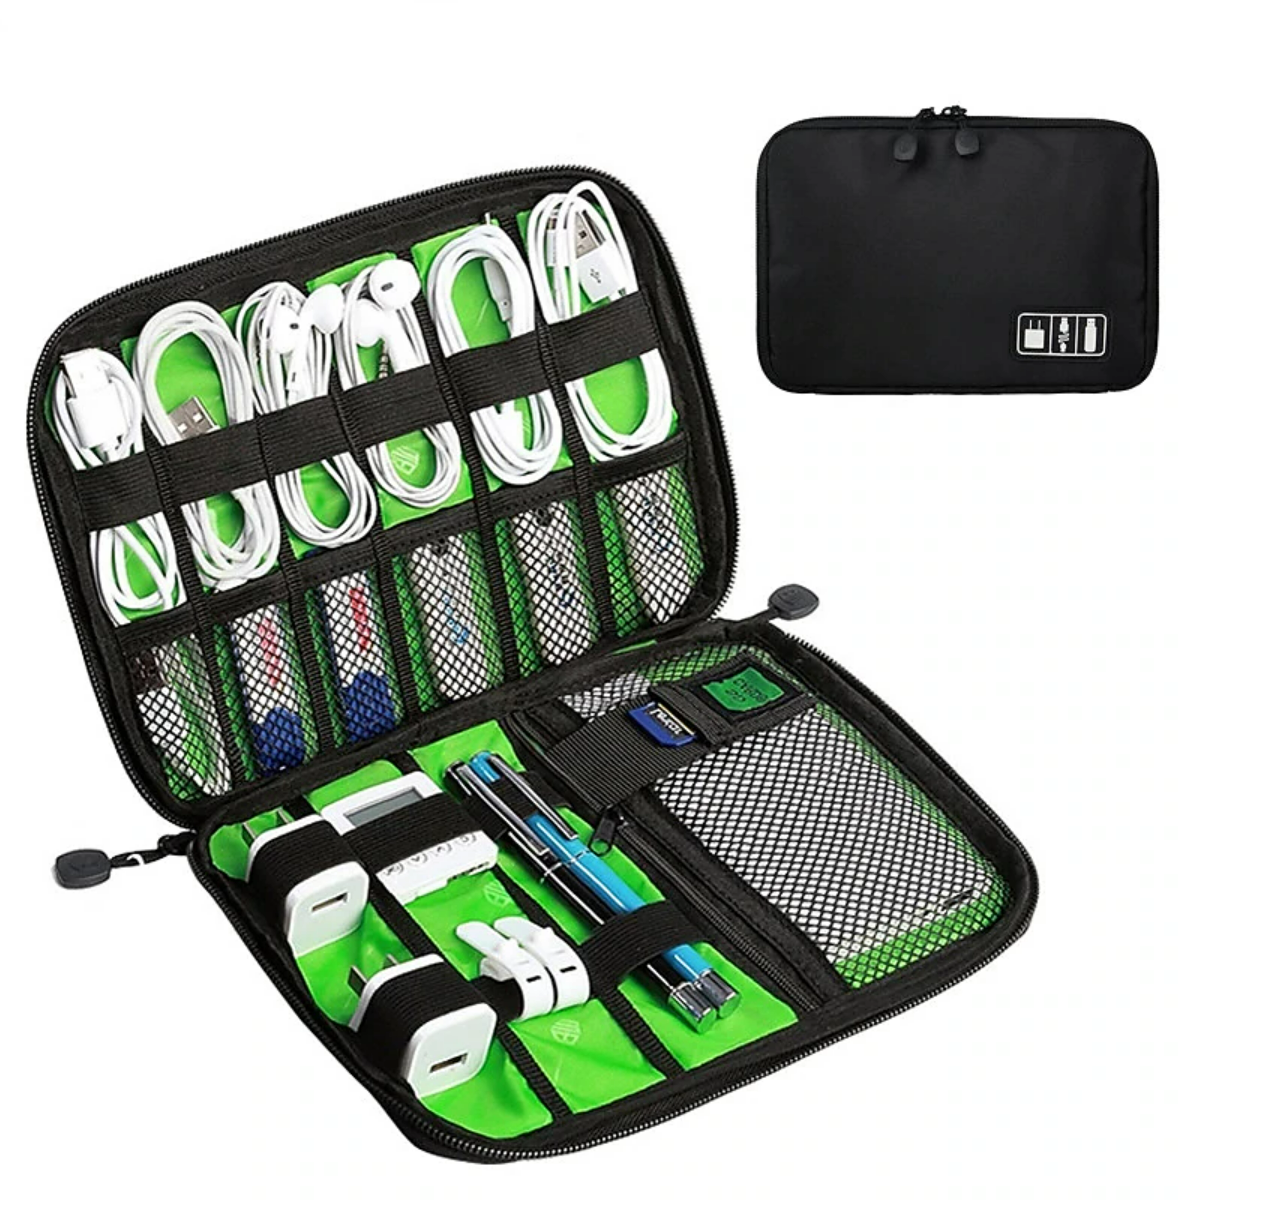 Portable Cable Organizer Bag Travel Digital Electronic Accessories Sto ...